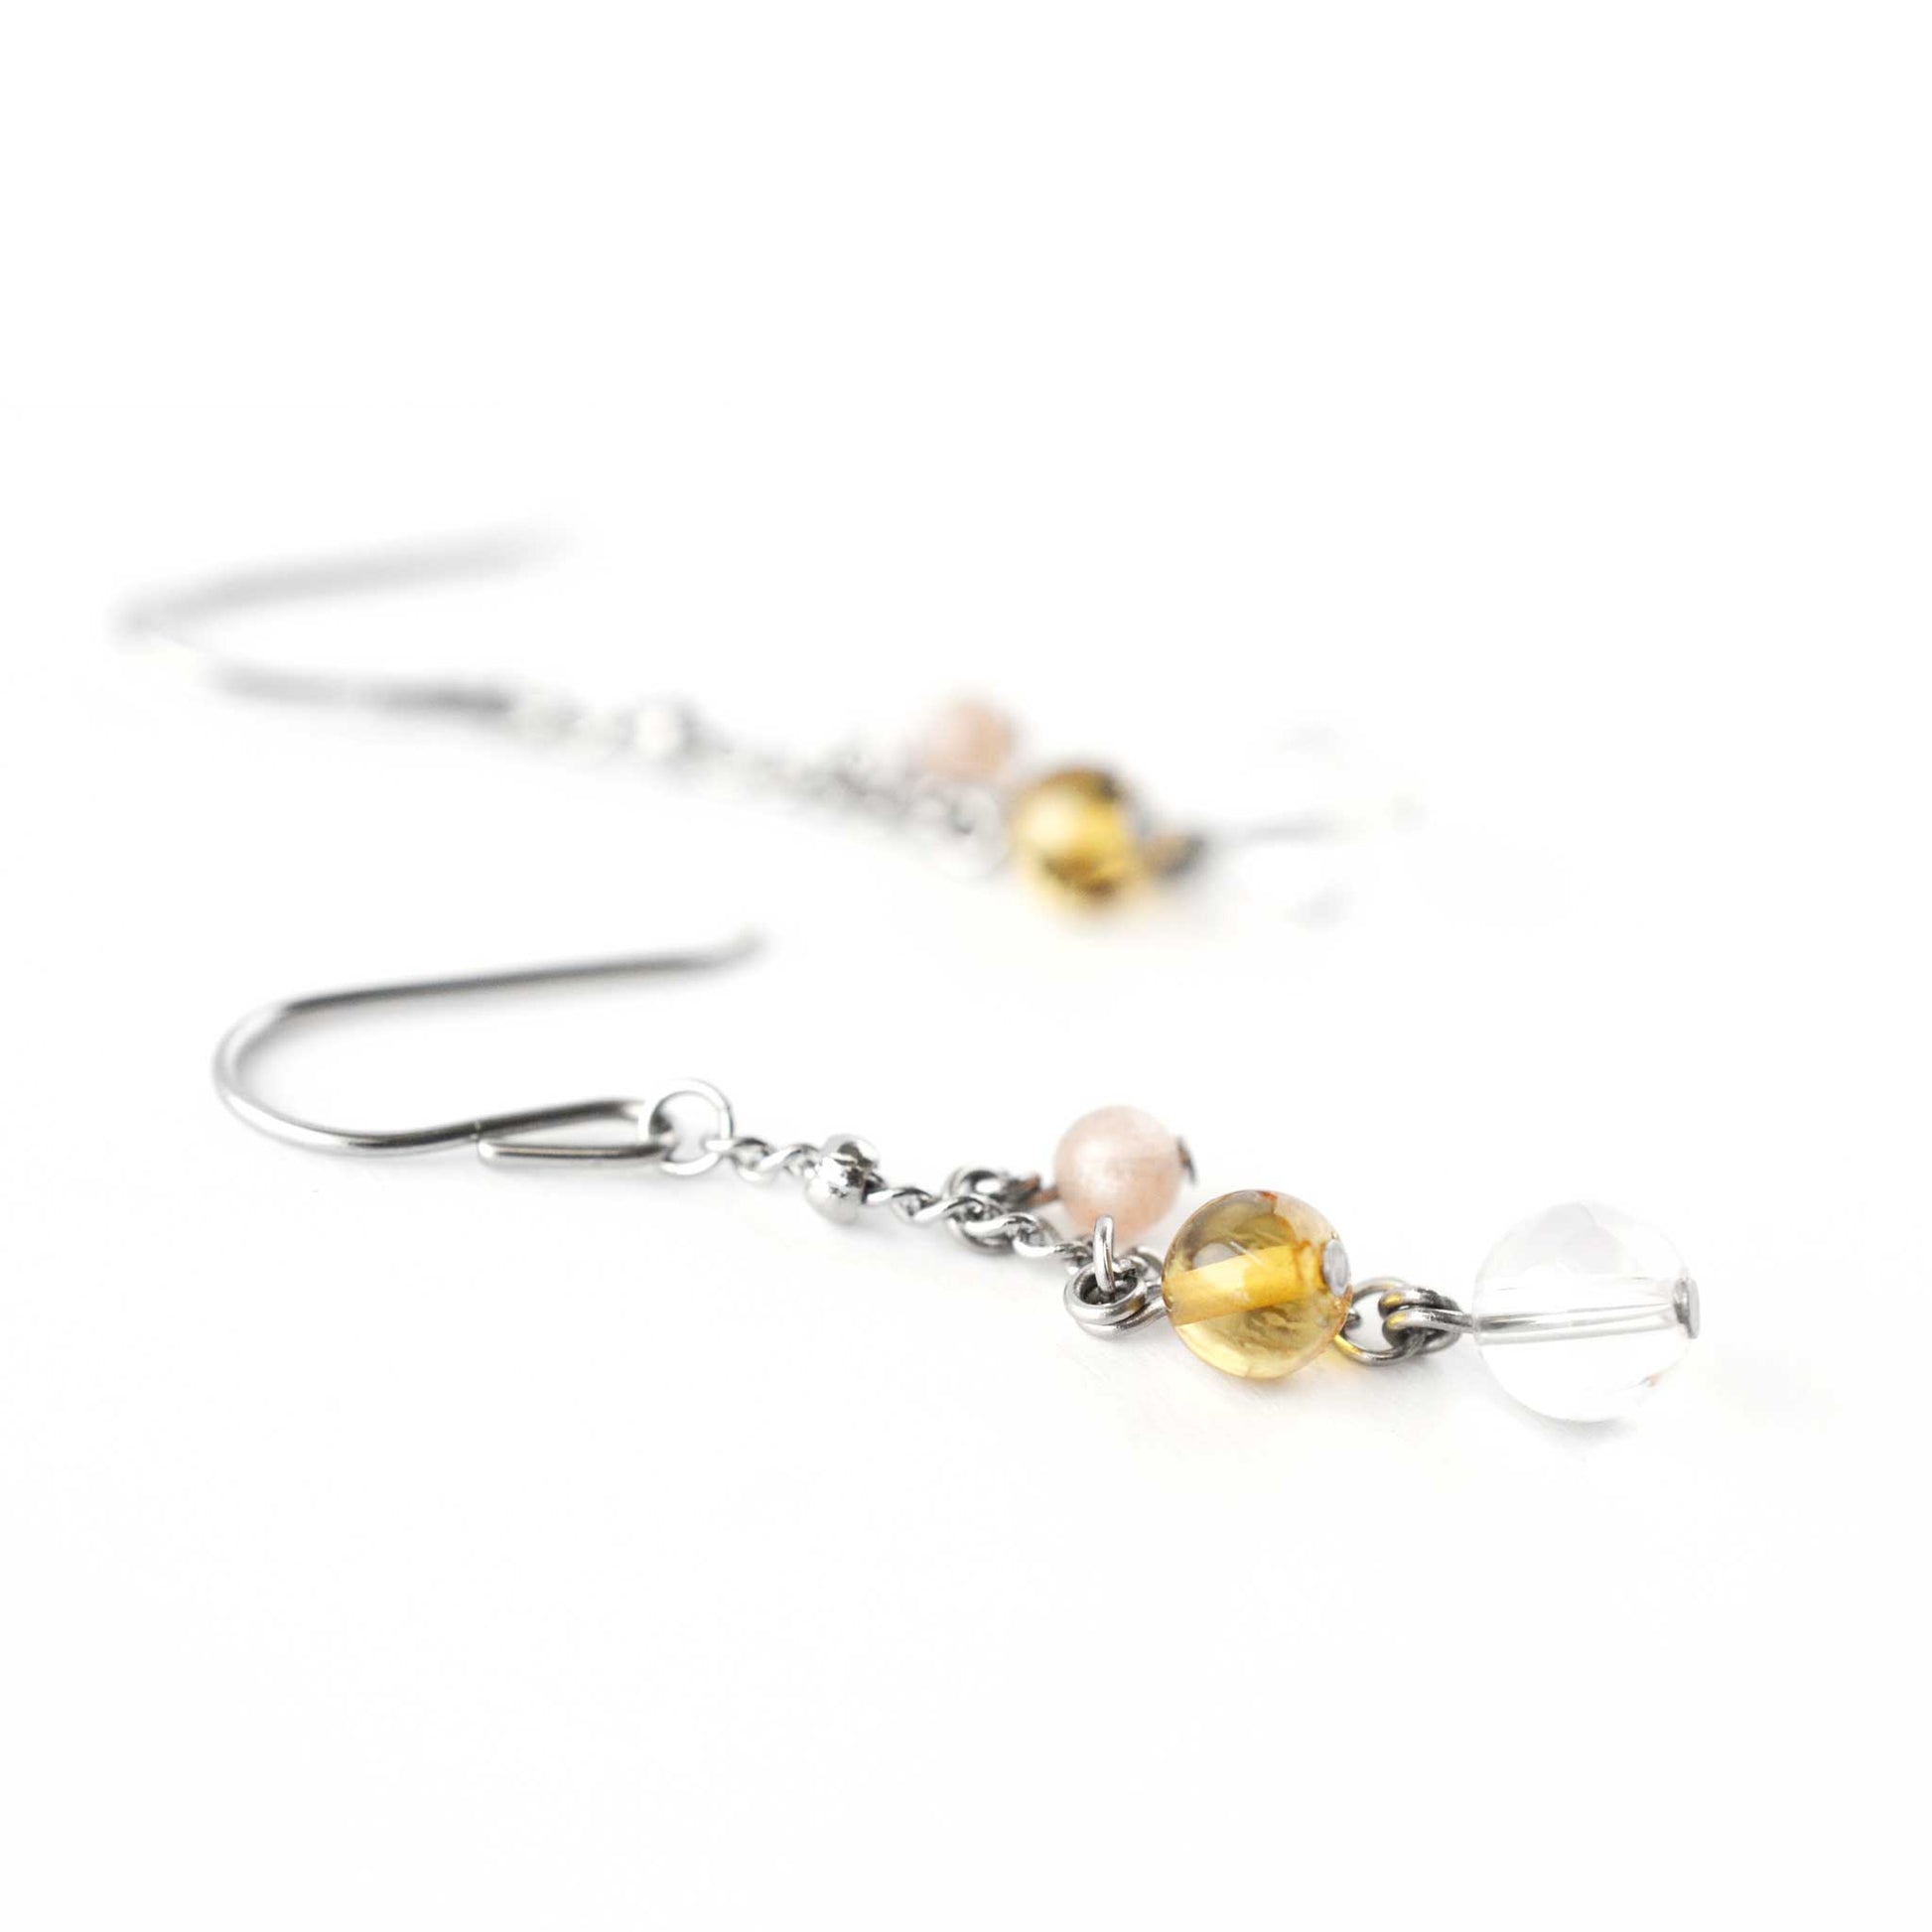 Close up of drop earring with Sunstone, Citrine & Rock Crystal gemstone beads